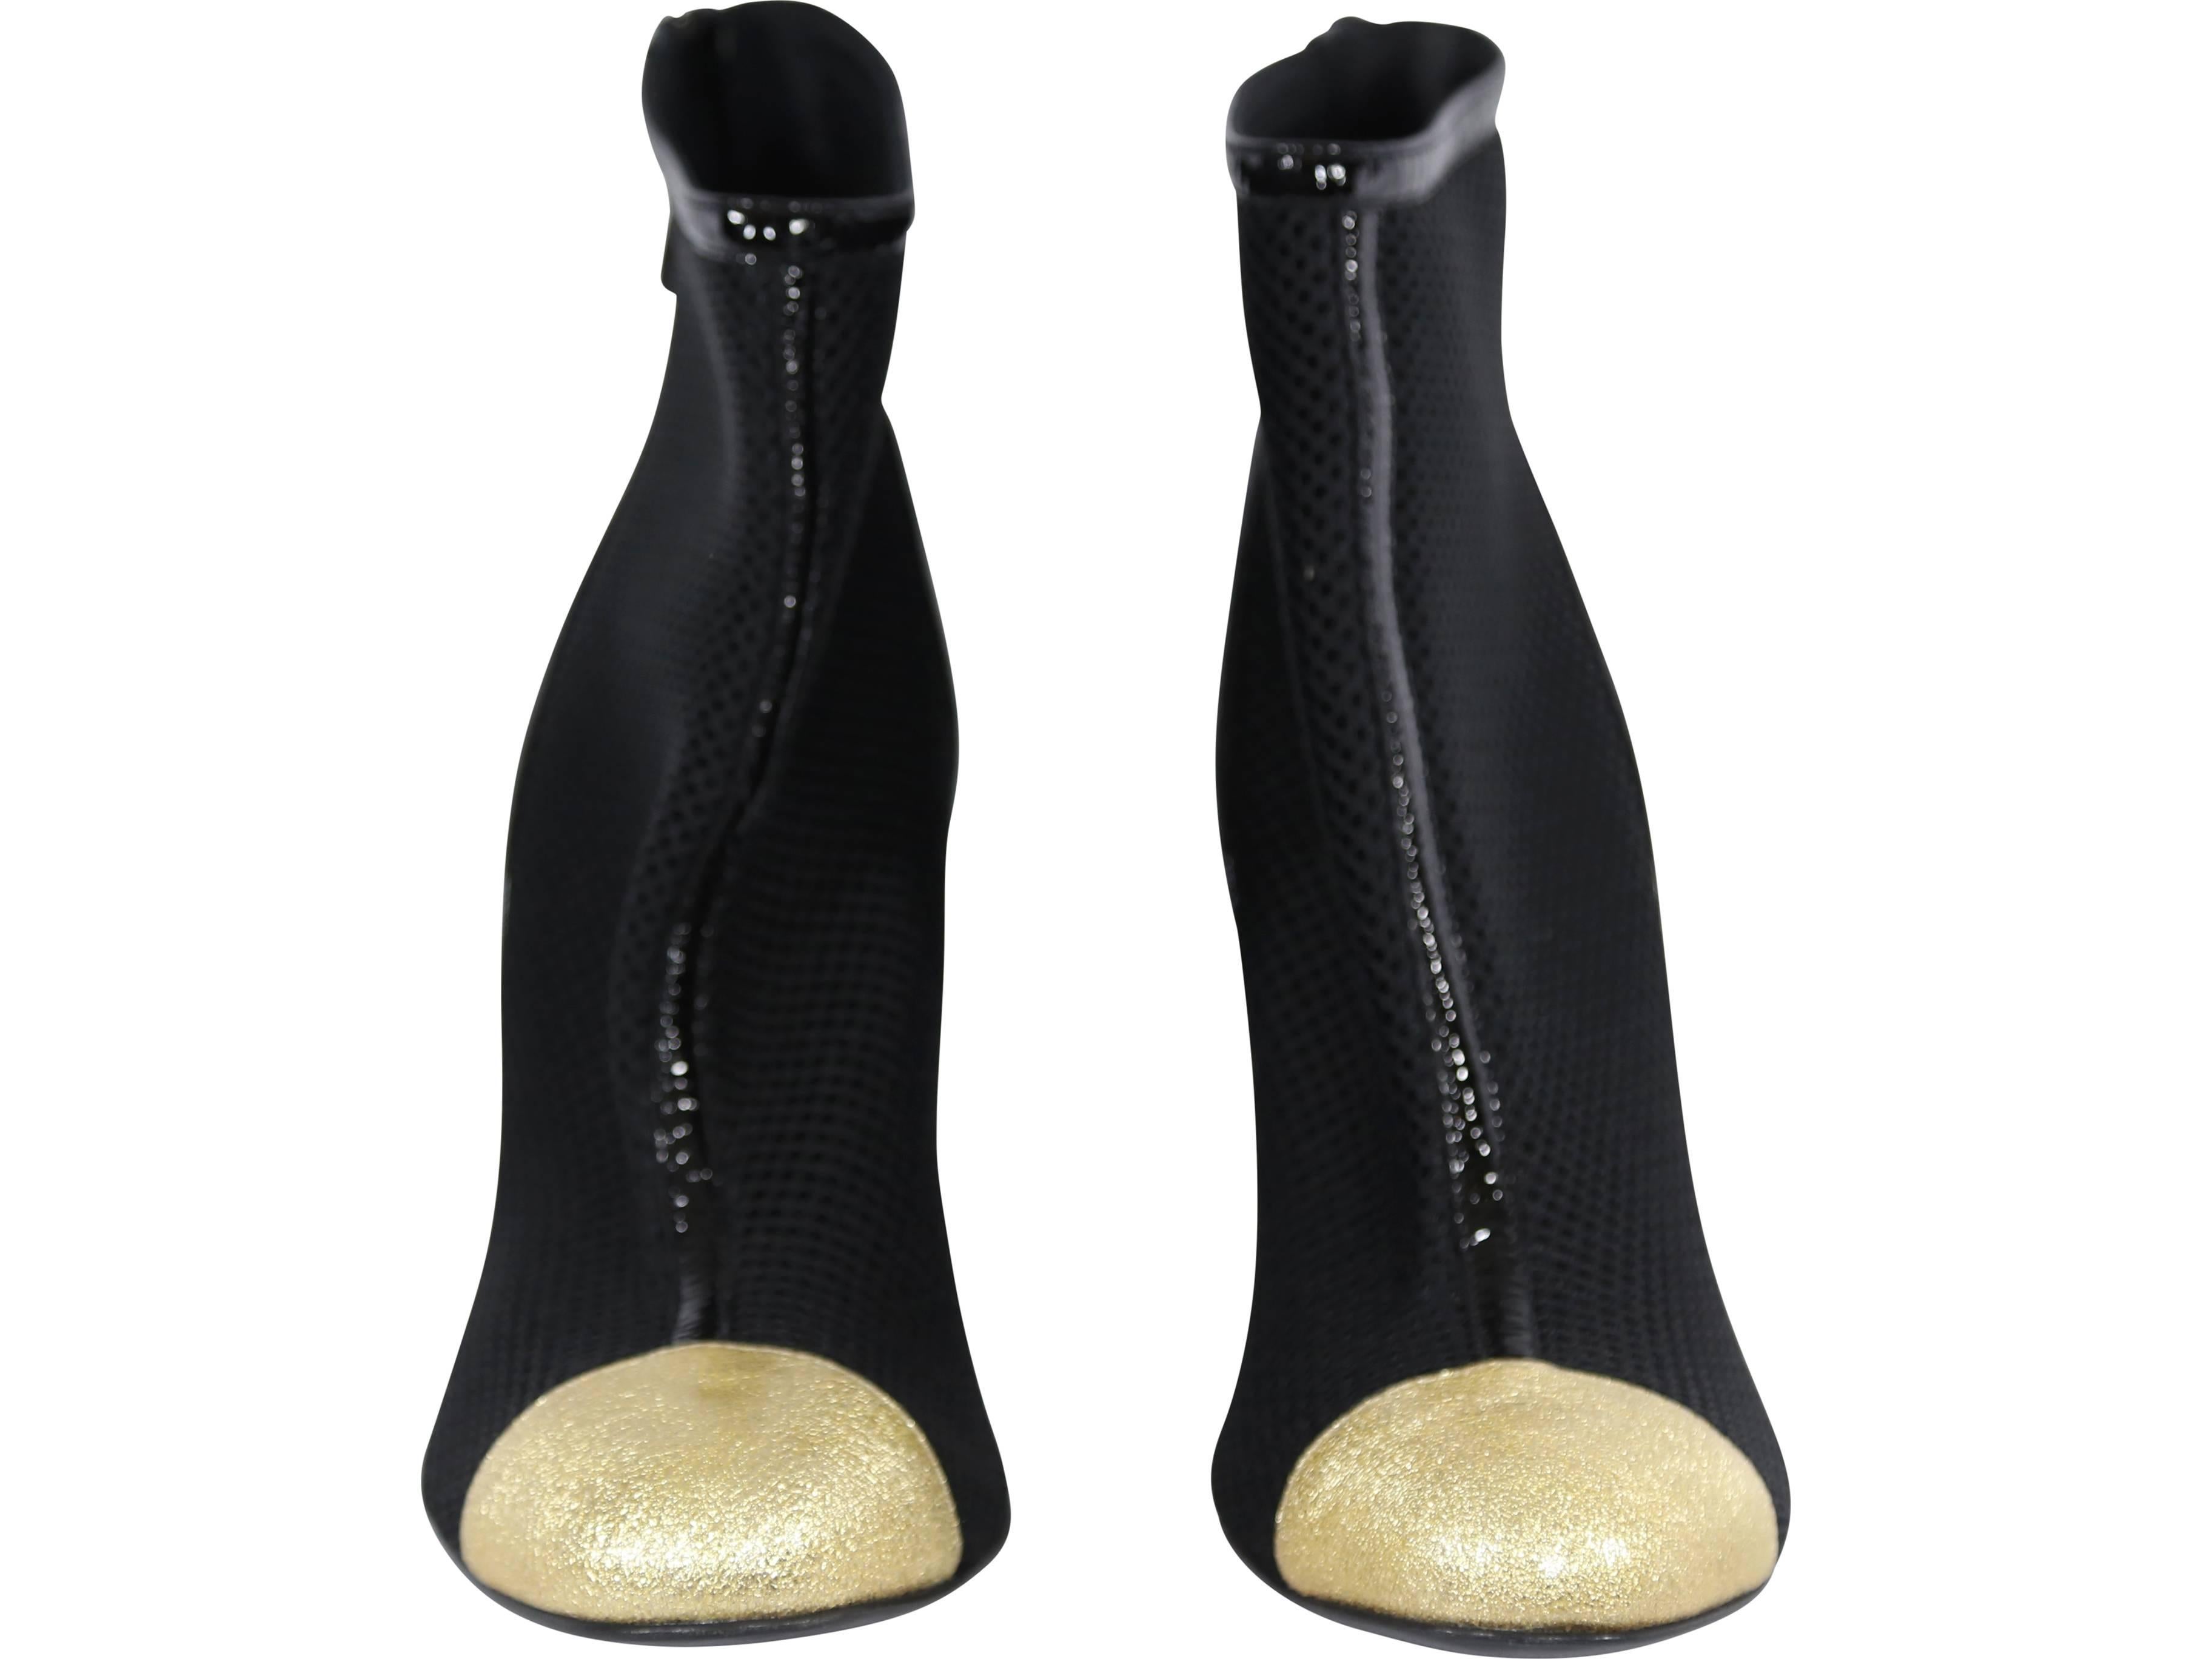 Chanel black patent leather ankle bootie with gold toe cap. 